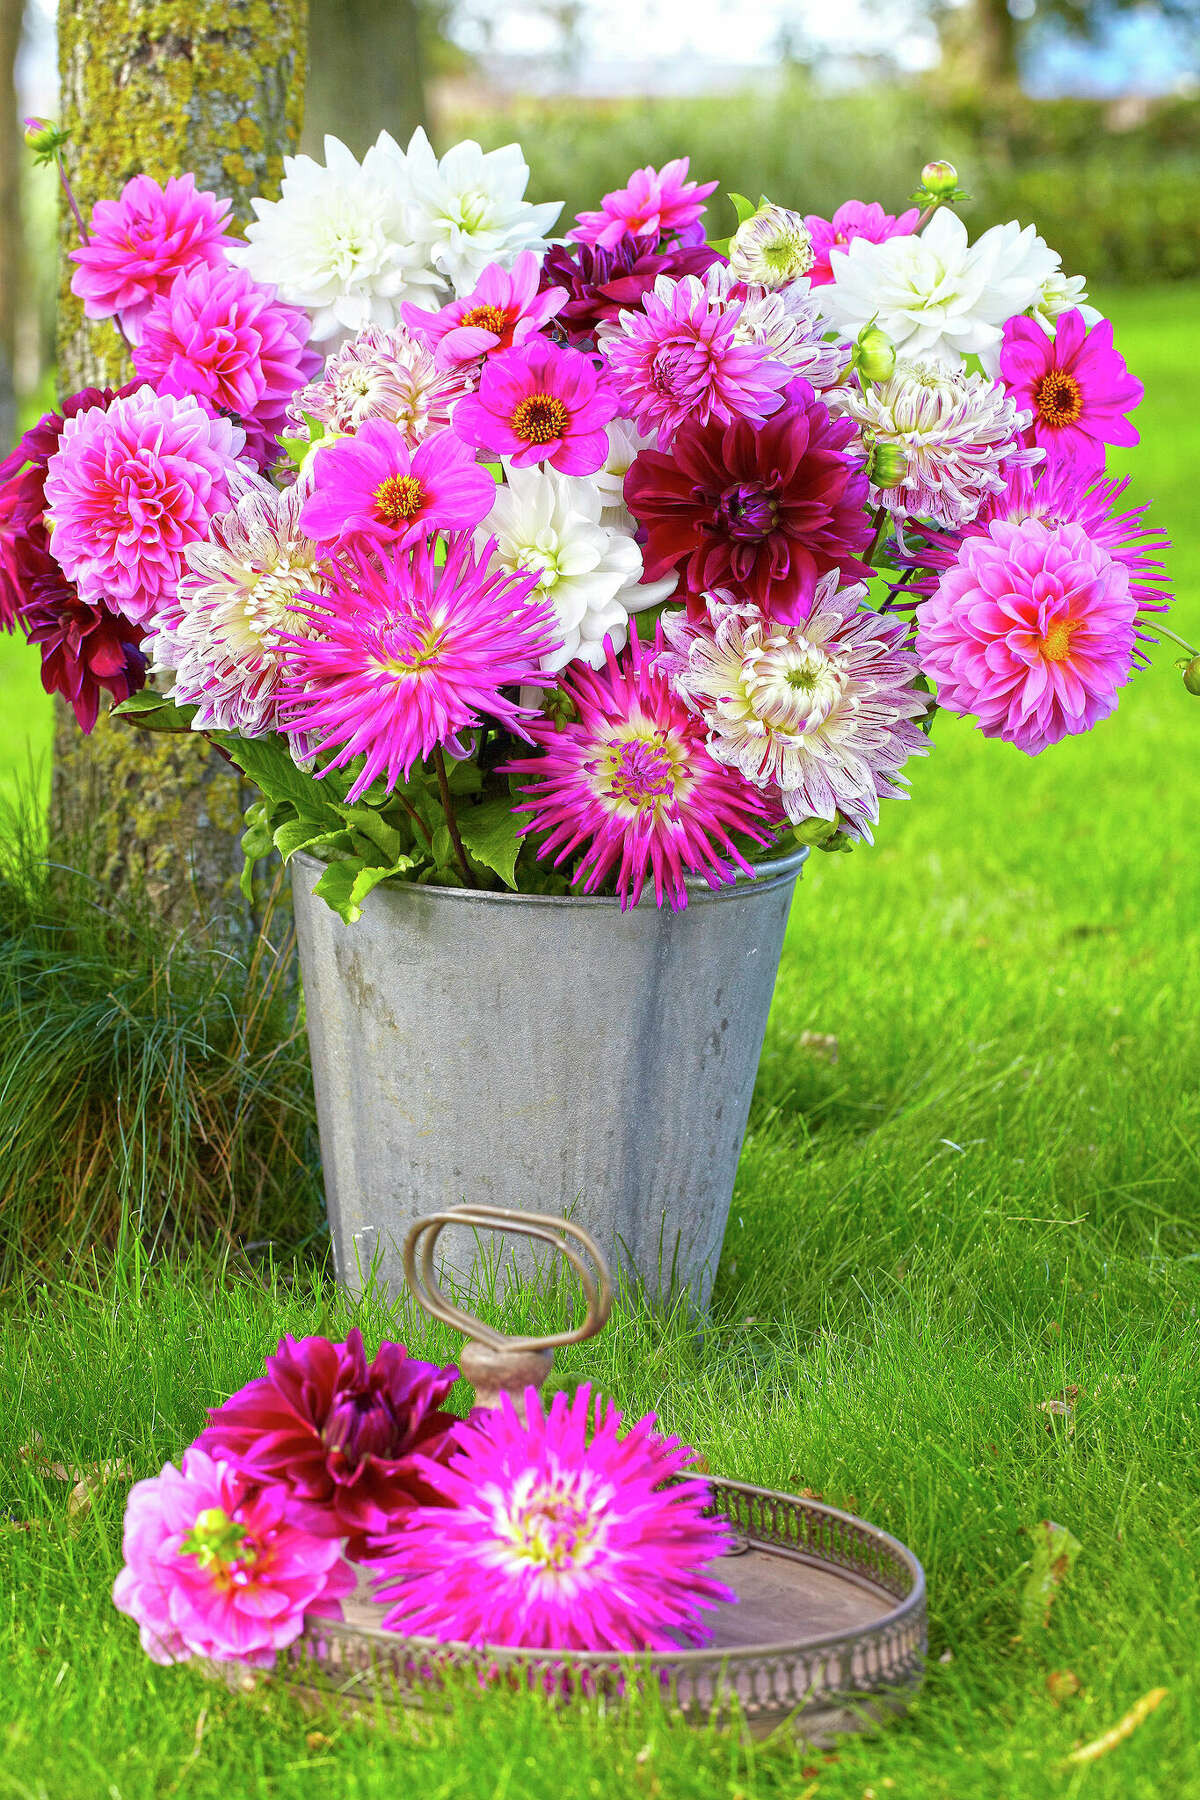 The more dahlias you cut for bouquets, the more flowers the plant will produce.